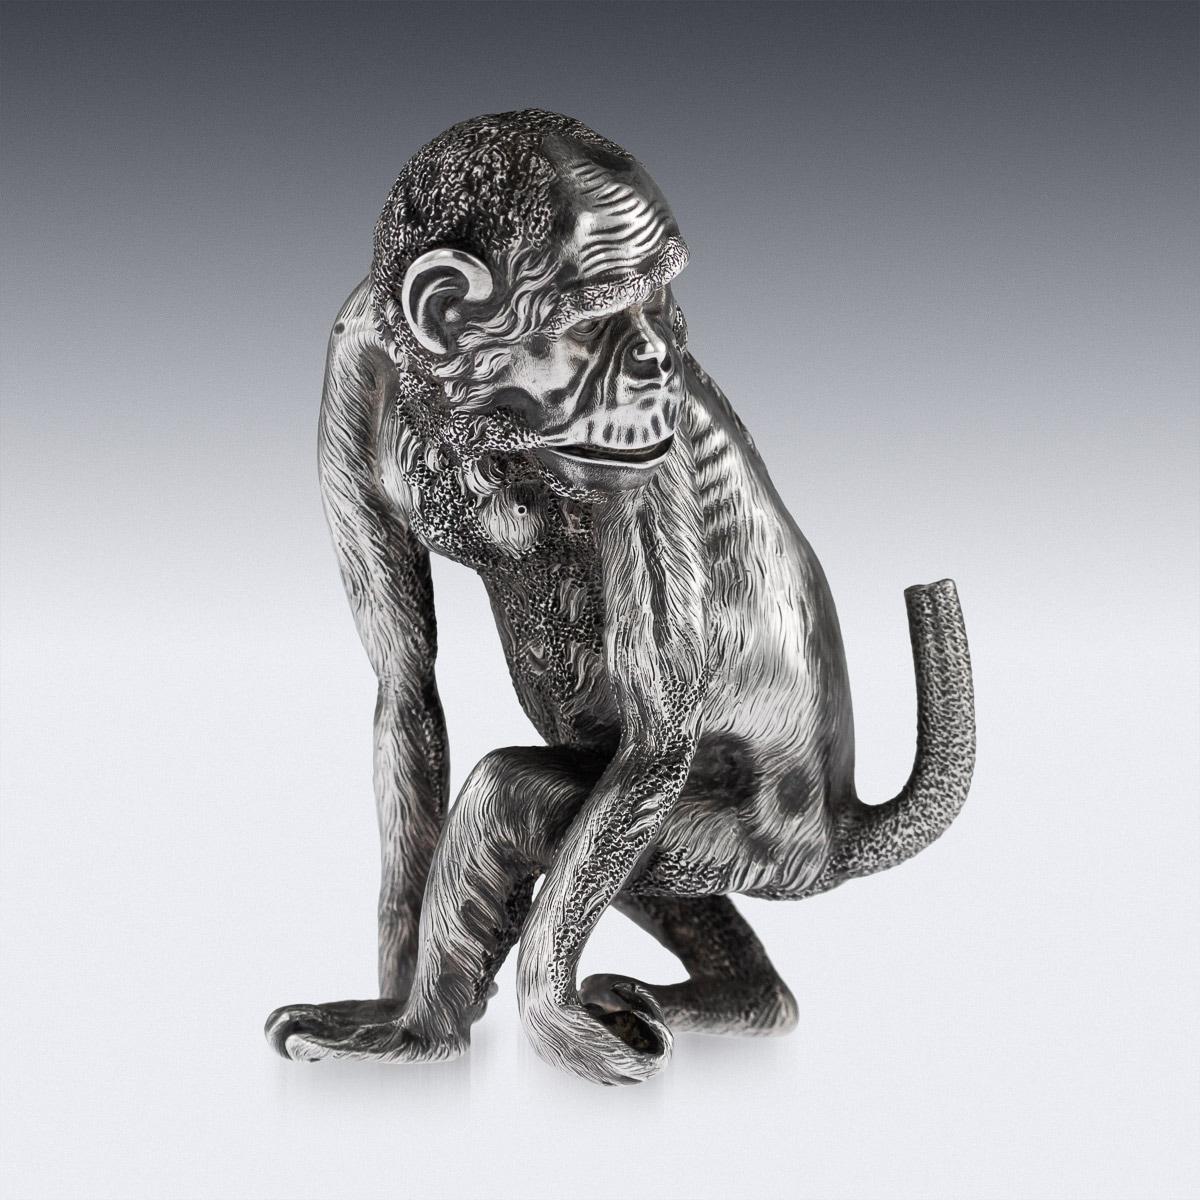 Antique early 20th century Imperial Russian solid silver cigar lighter, realistically cast and chased as a chimpanzee looking over his shoulder at his tail. Hallmarked Russian silver 88 (915 standard), St-Petersburg, 1896-1908, Fabergé in Cyrillic